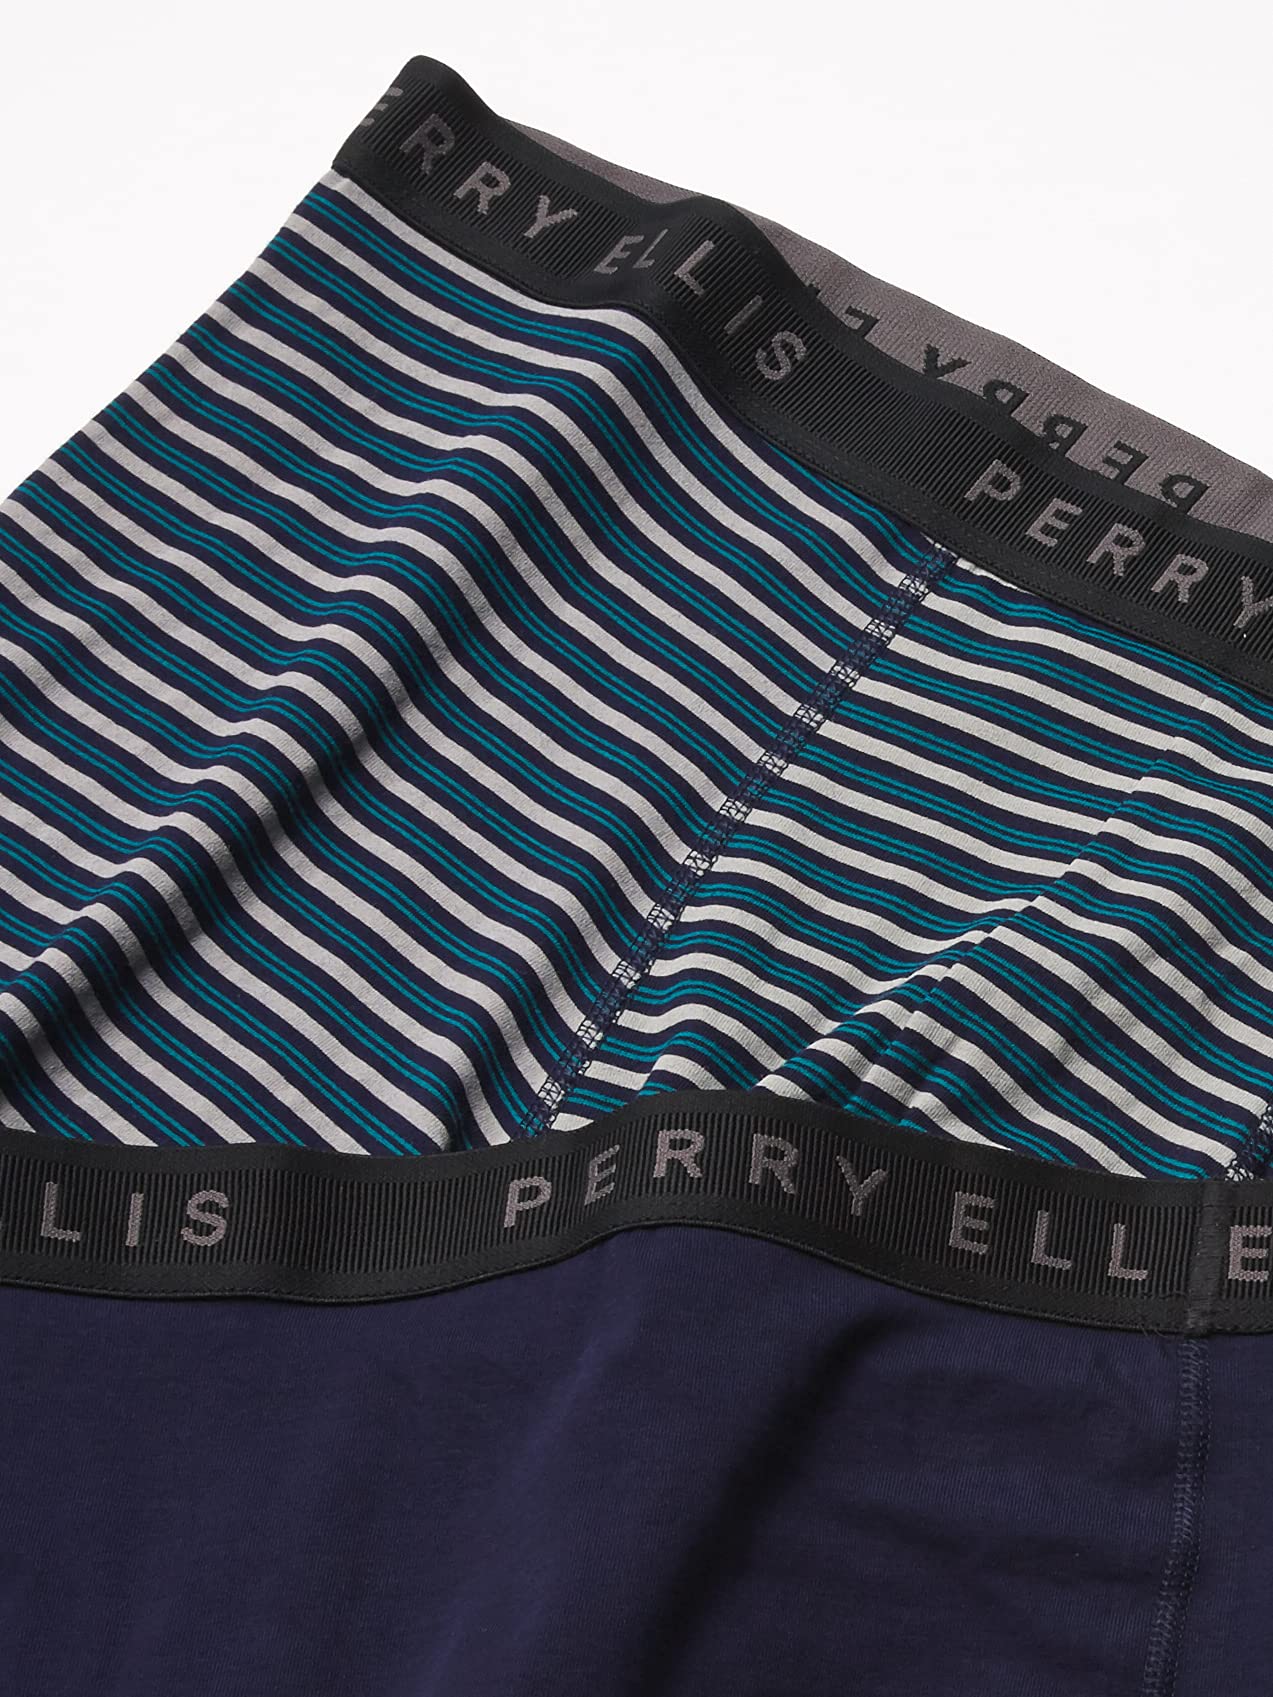 Perry Ellis Men's Cotton Stretch Boxer Briefs, Tagless, No Roll Waistband, 5 Pack